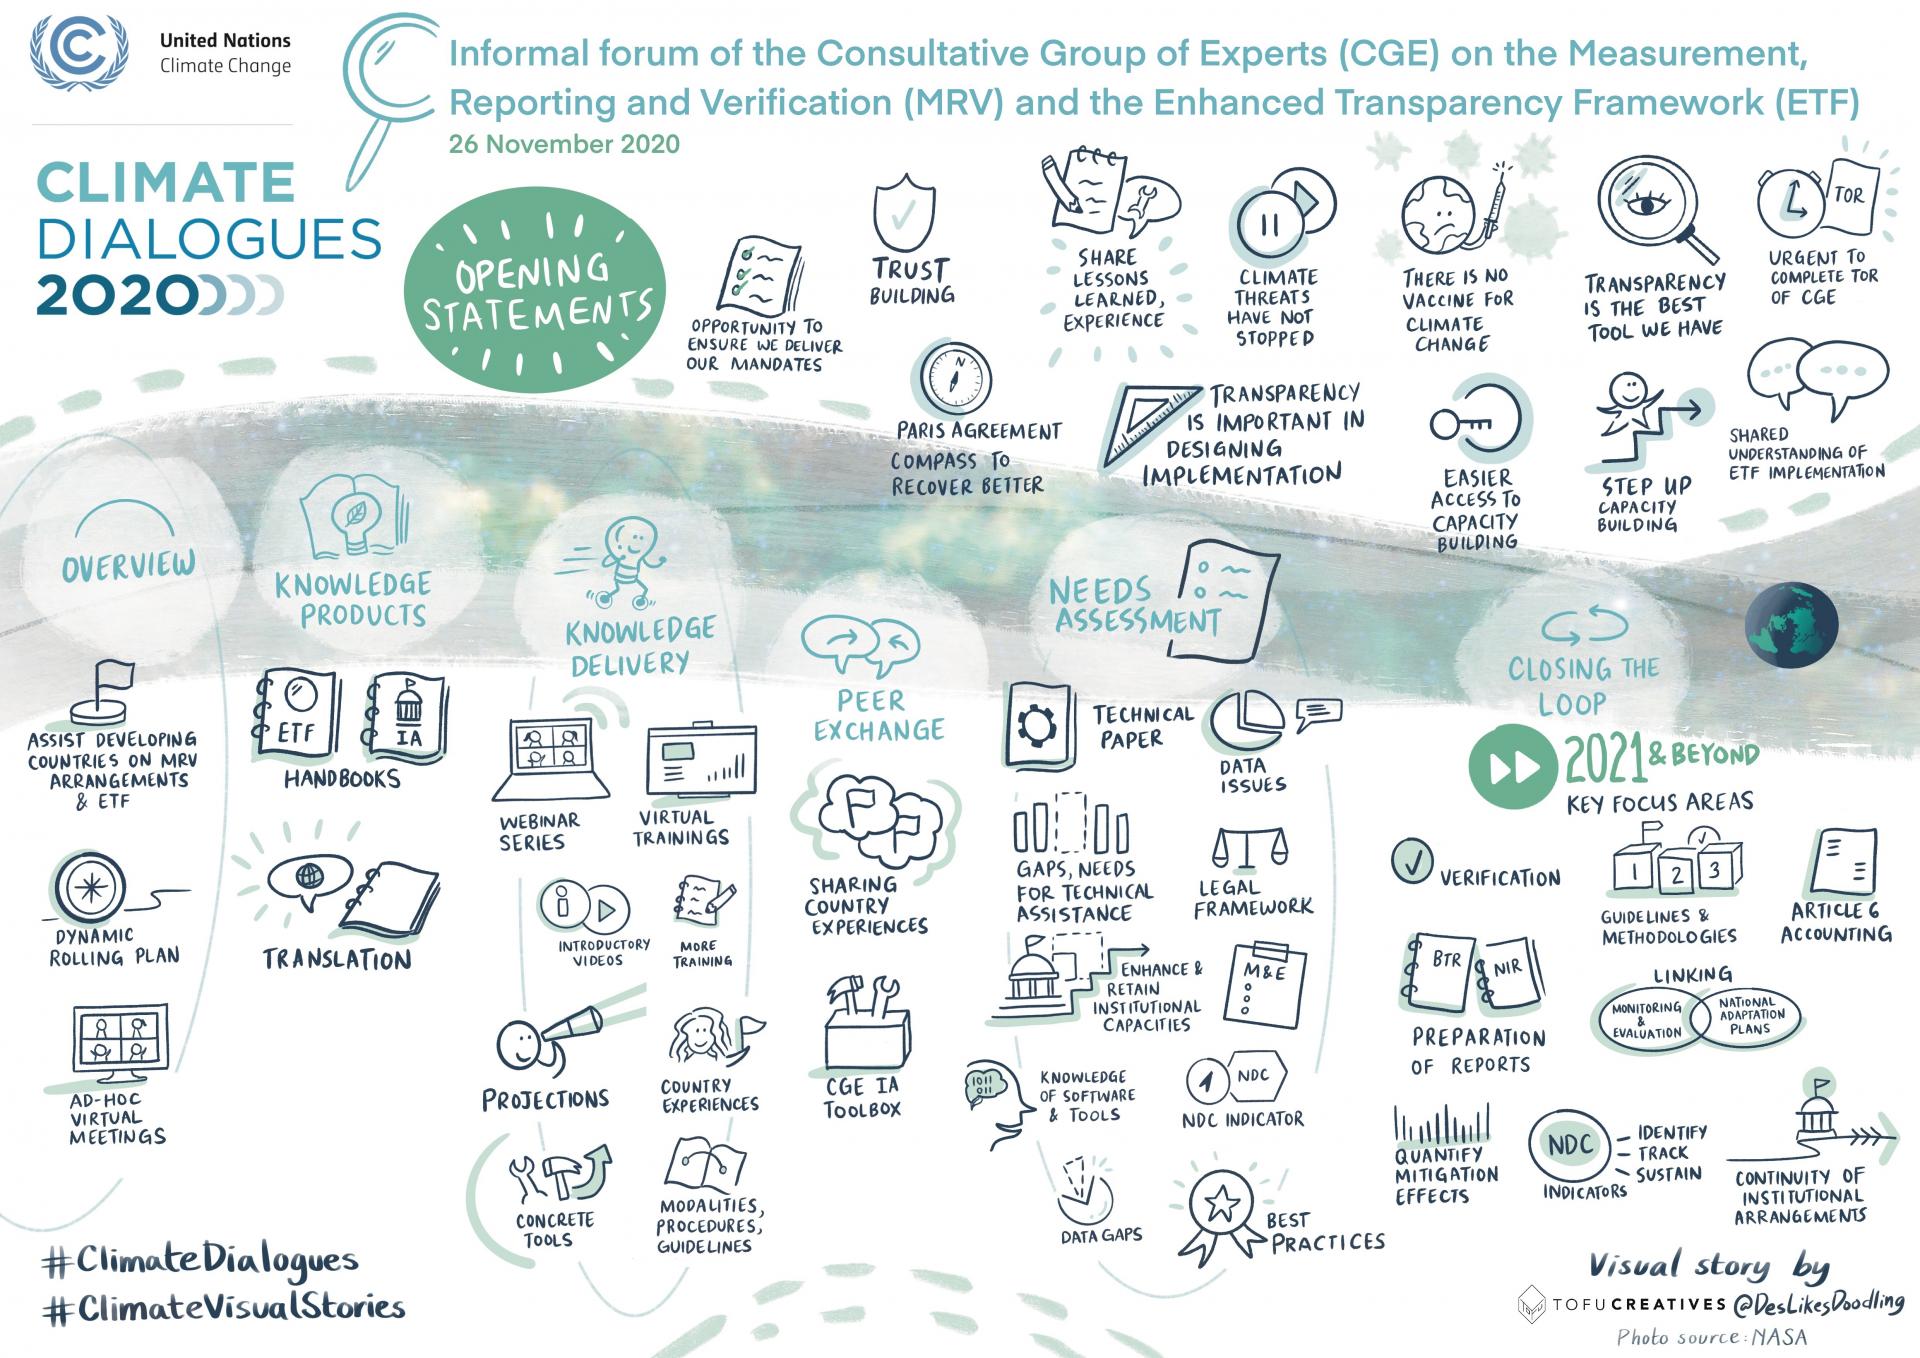 CGE Climate Dialogues